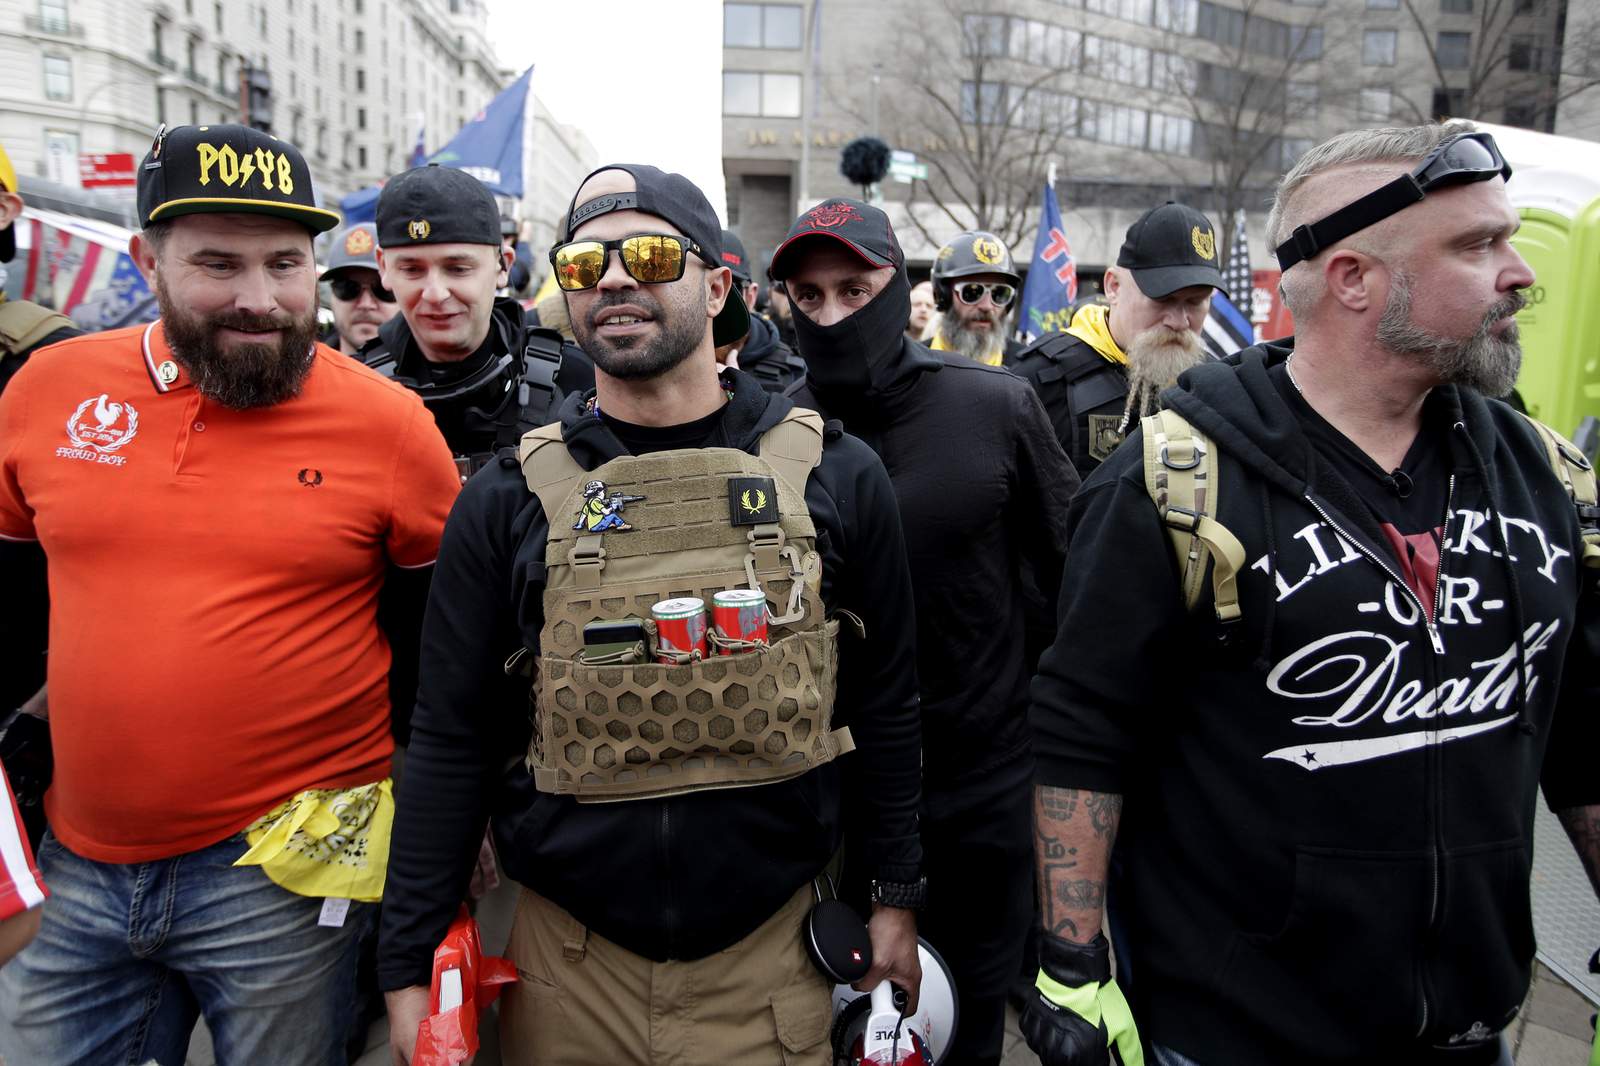 How the Proud Boys became America’s most prominent hate group